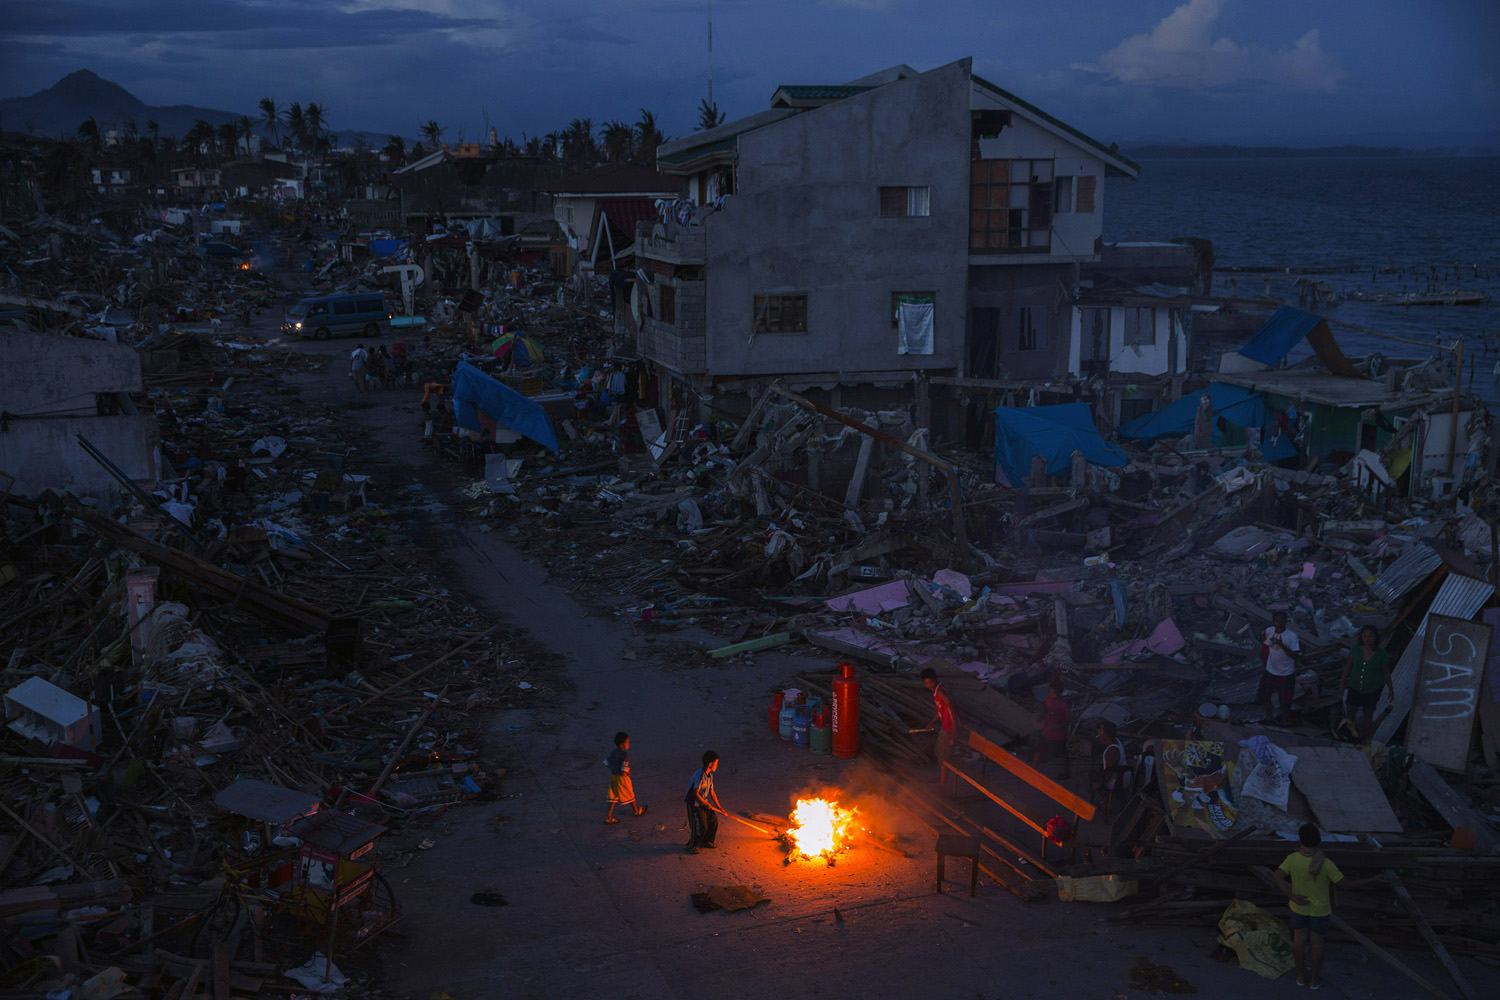 People play by a fire in a neighbourhood destroyed by Haiyan Typhoon in Tacloban, The Philippines on November 16, 2013.